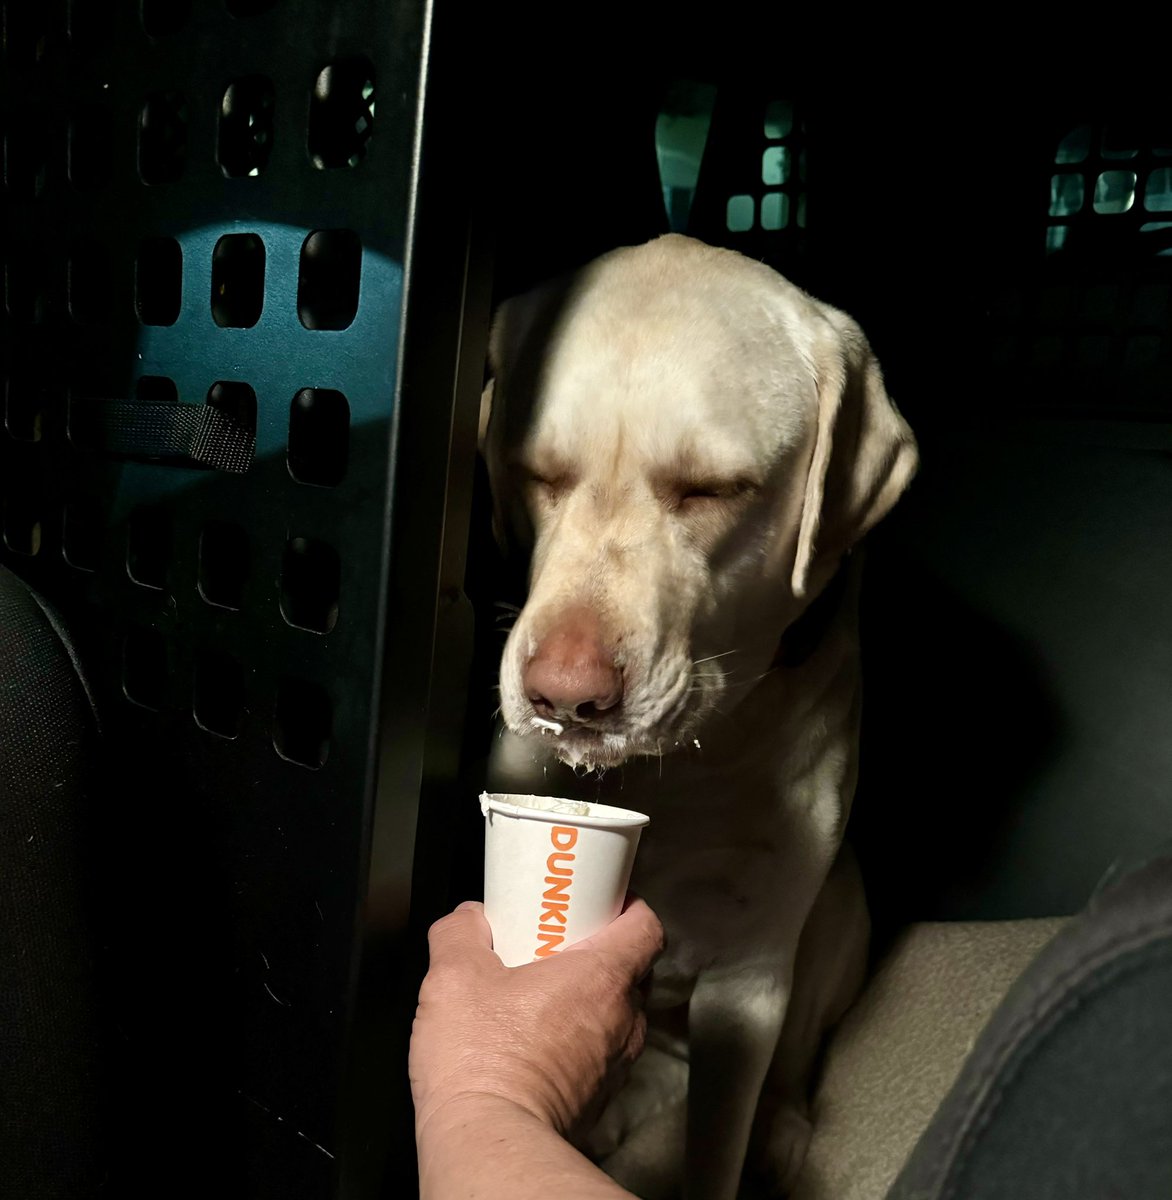 Customary pup cup before the start of a long road trip. #firstresponderspack #roadtrip #grateful #dunkin #giveback #makeadifference